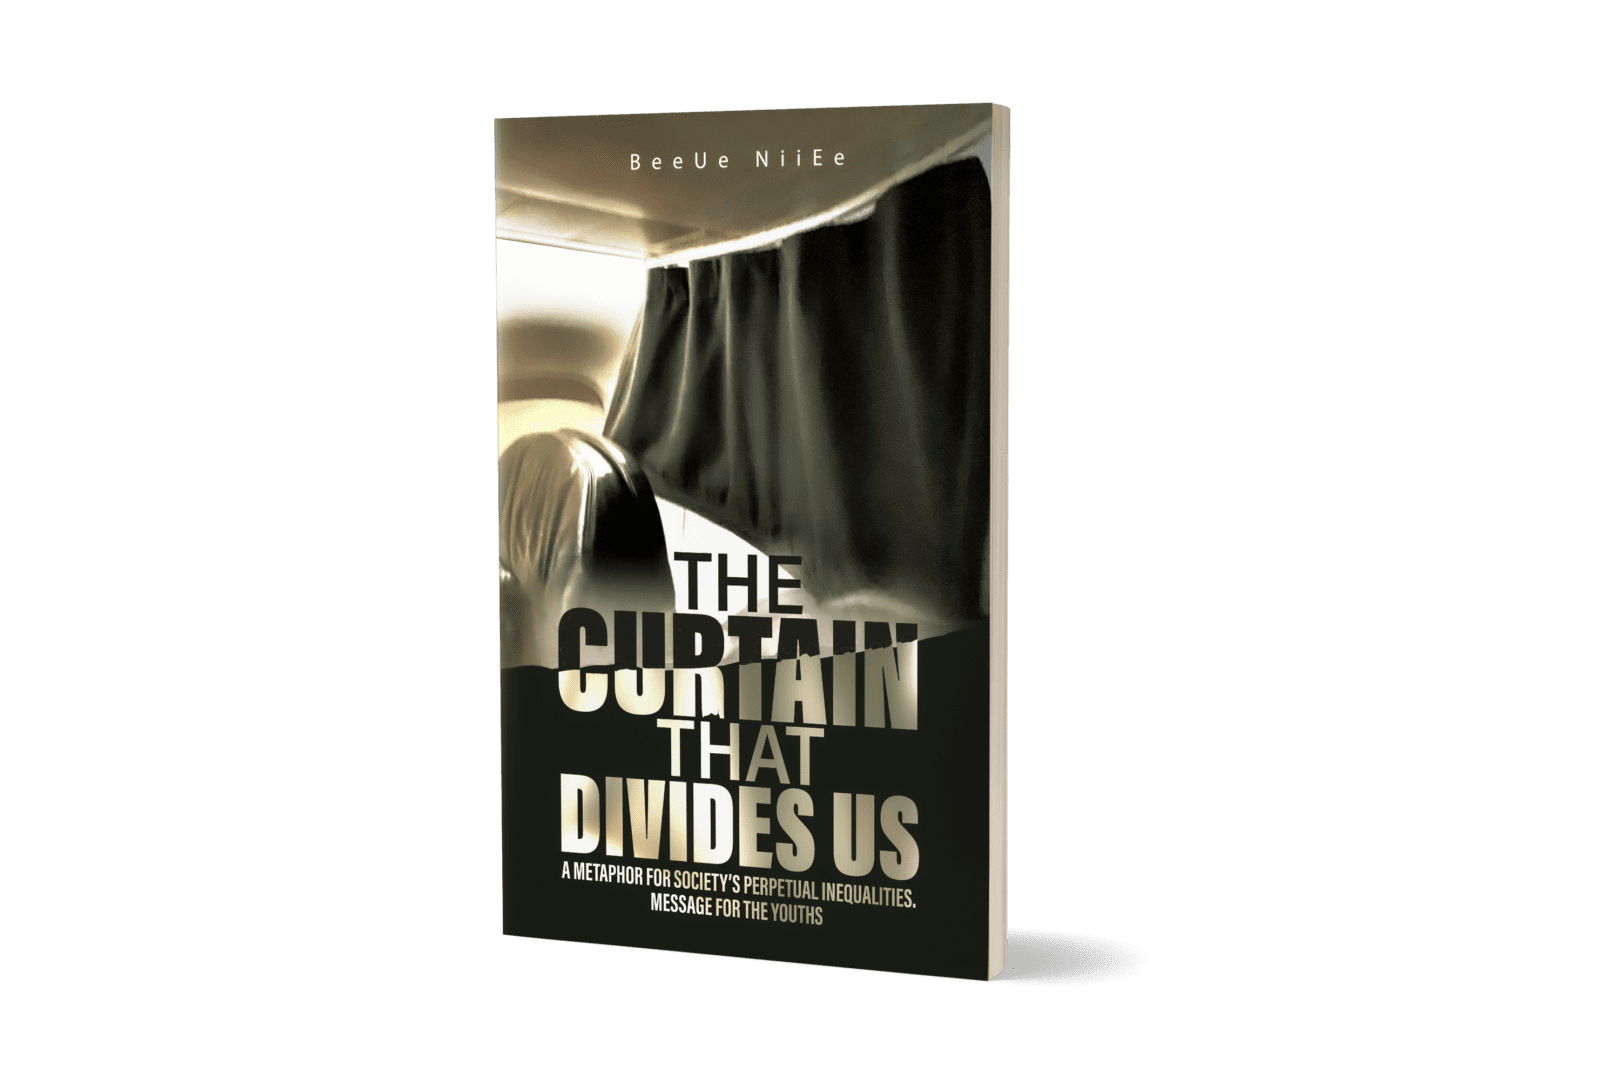 A book cover with the title " the curtain that divides us ".